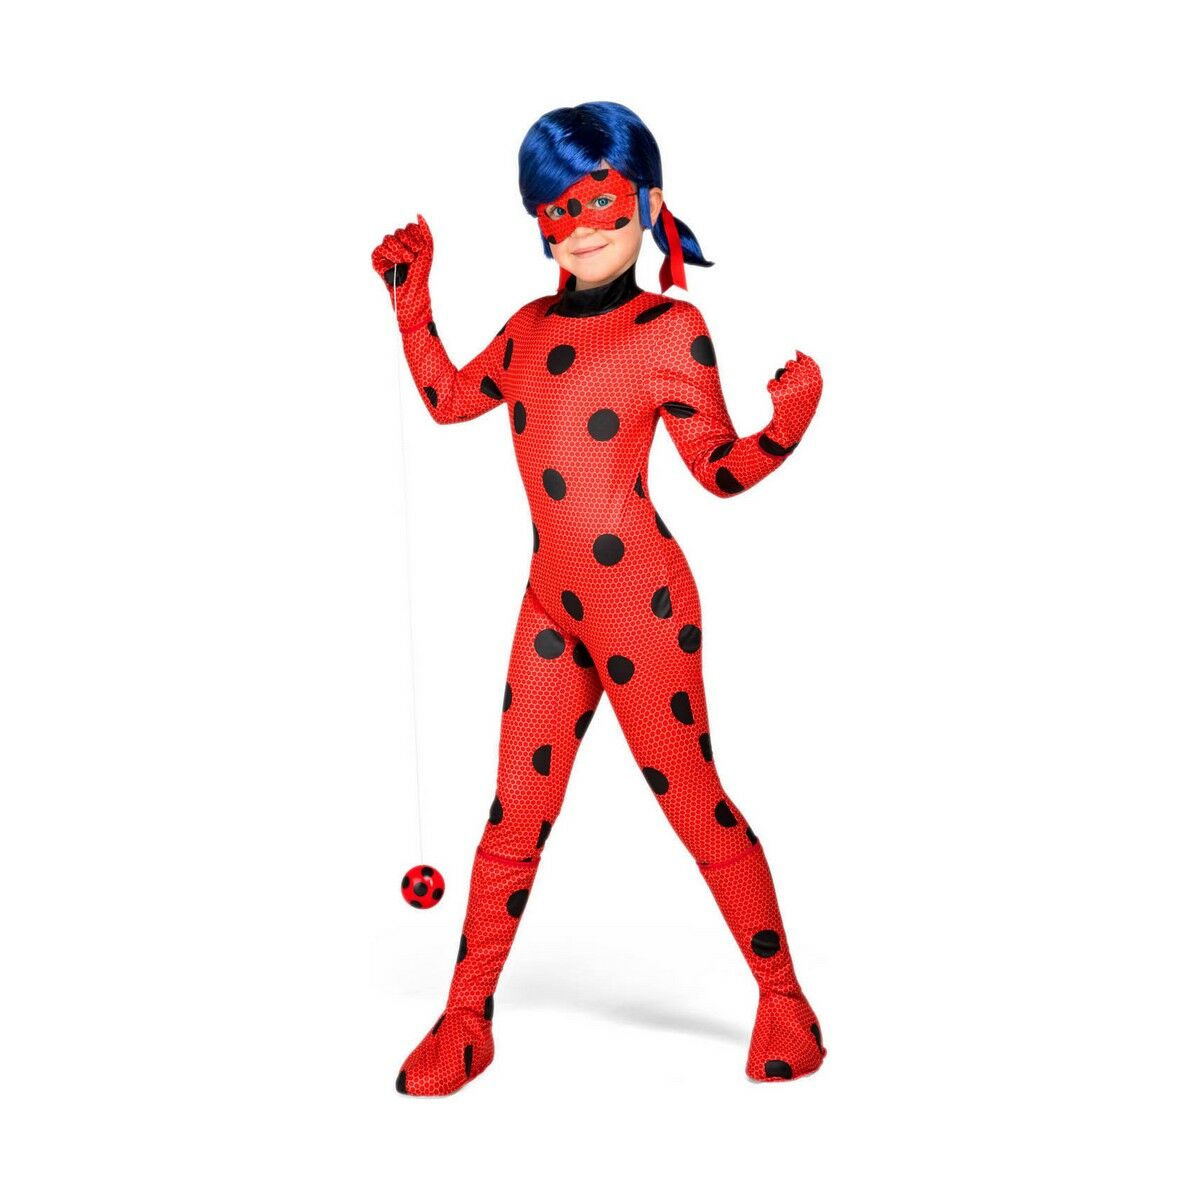 Costume for Children My Other Me LadyBug (7 Pieces) - Bathrooms Direct IE